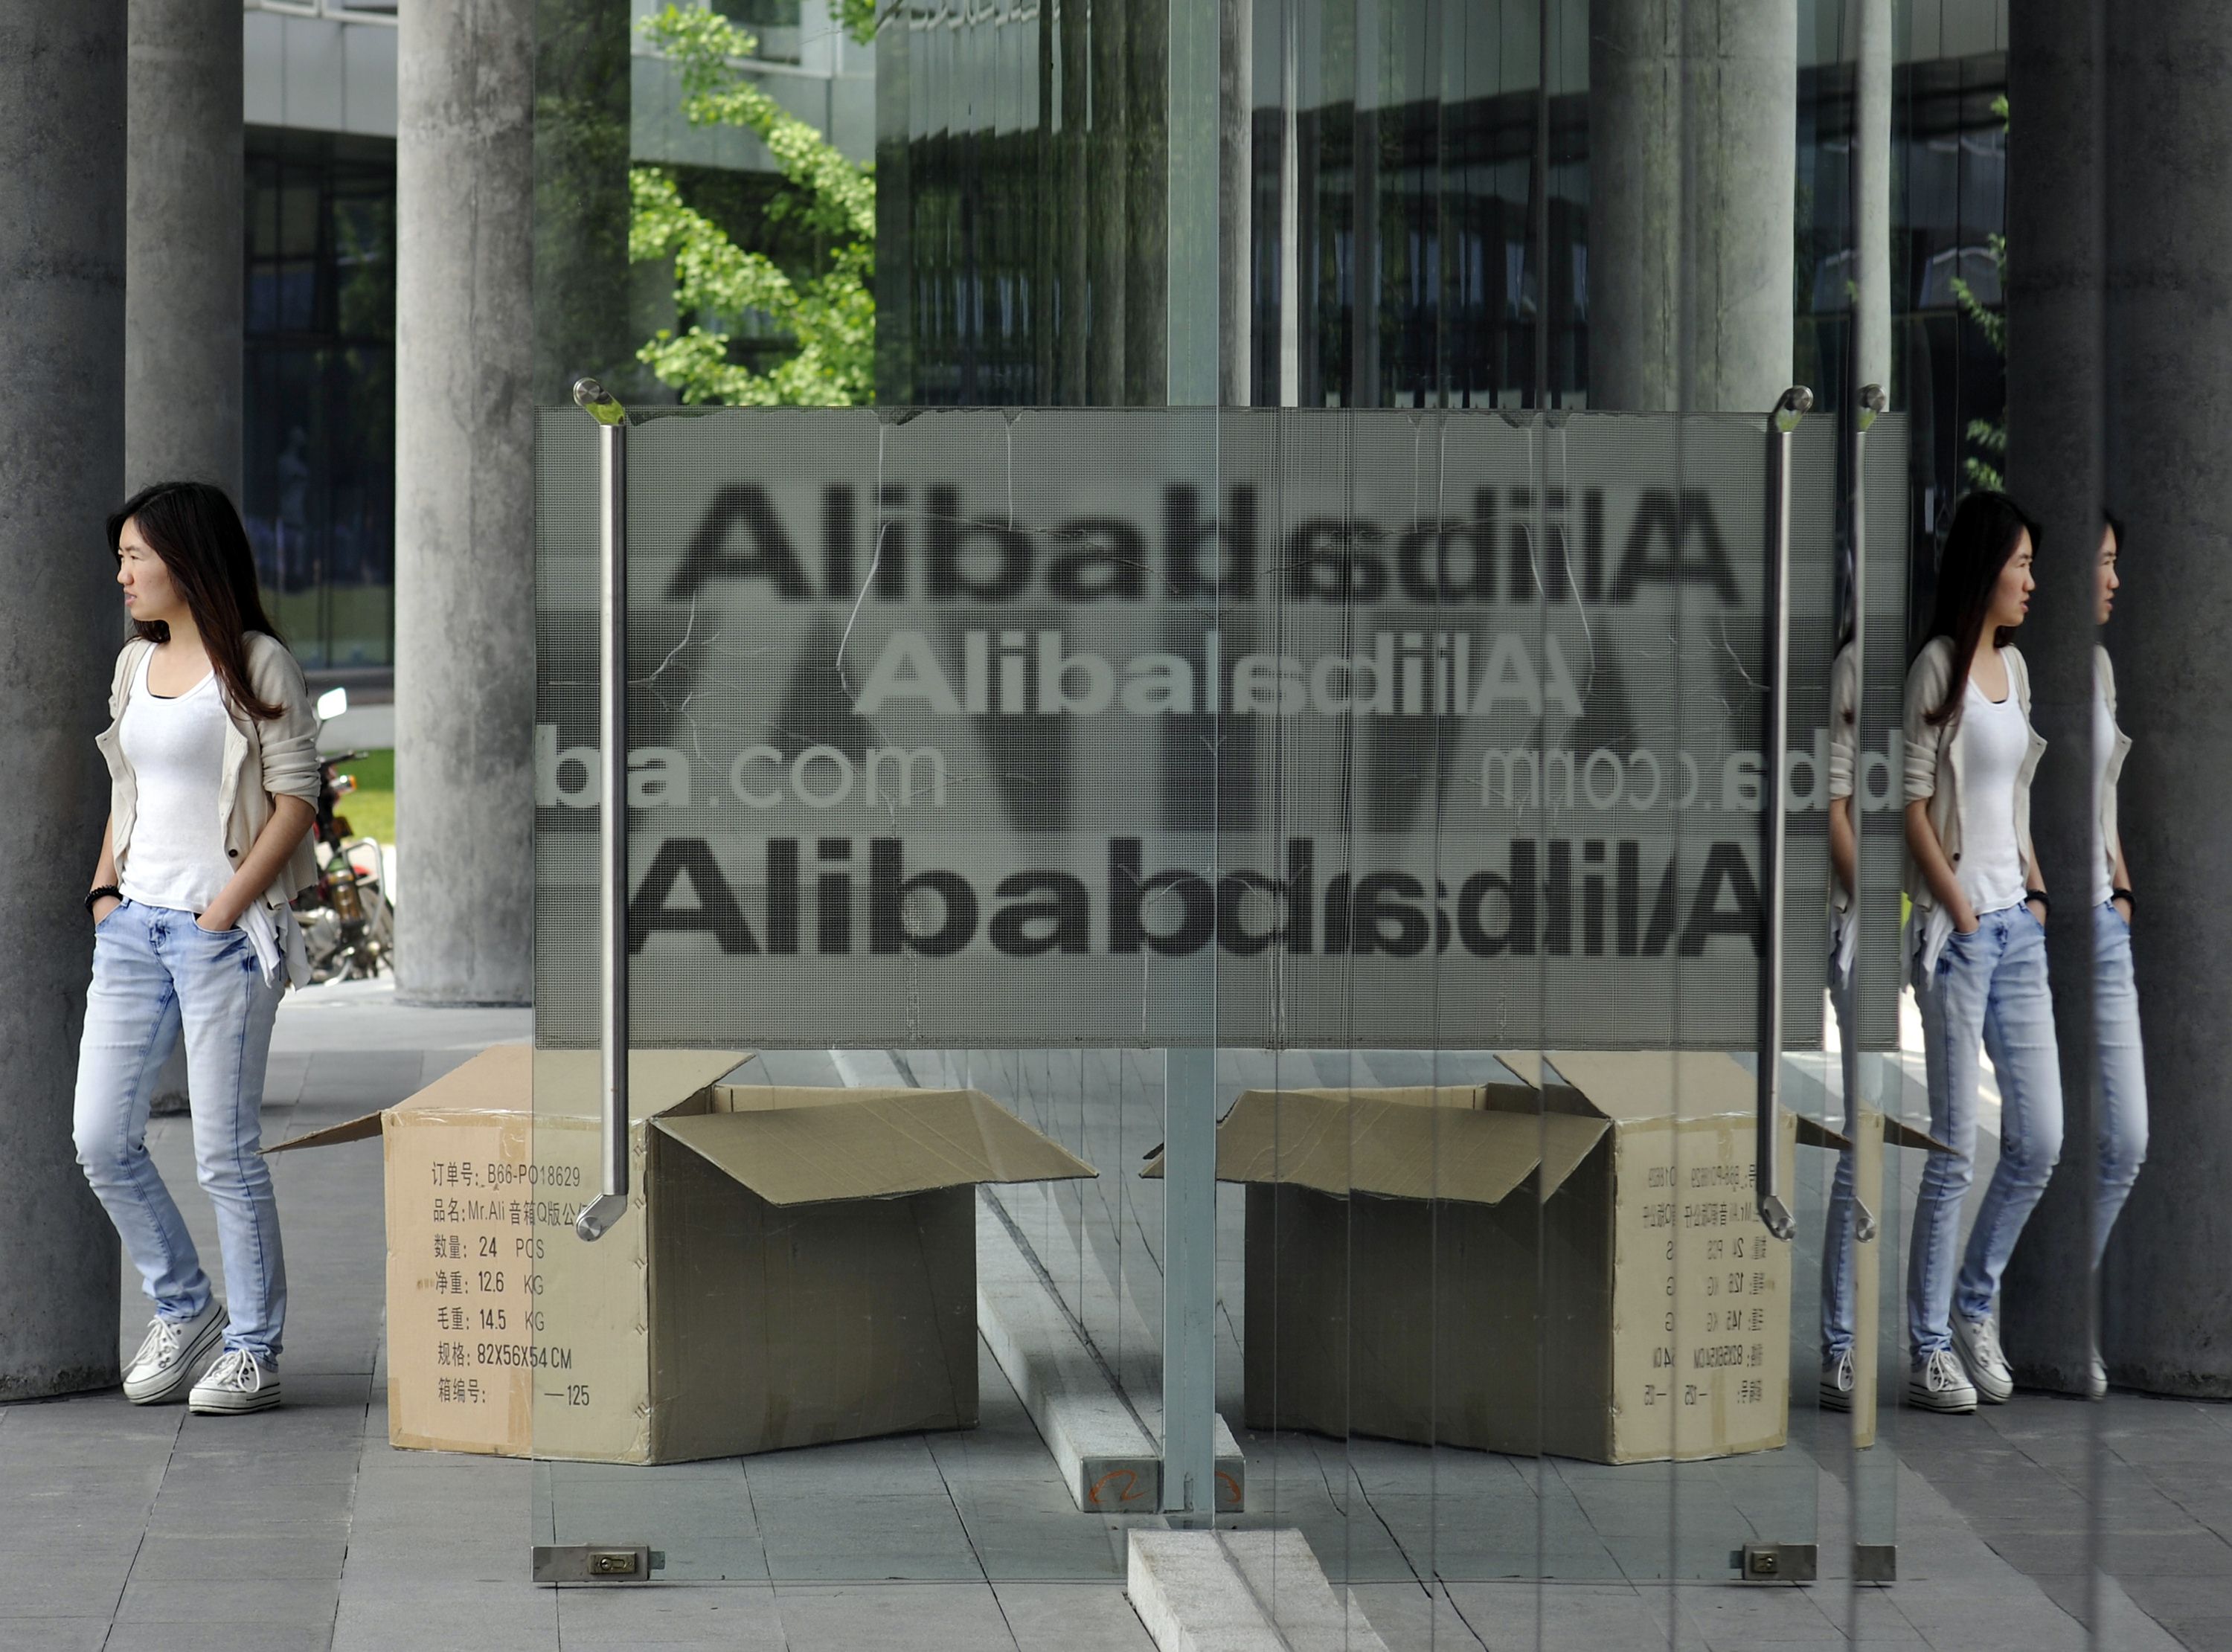 A woman walks out from the Alibaba head office building in Hangzhou, in eastern China's Zhejiang province on May 21, 2012. Photo: AFP